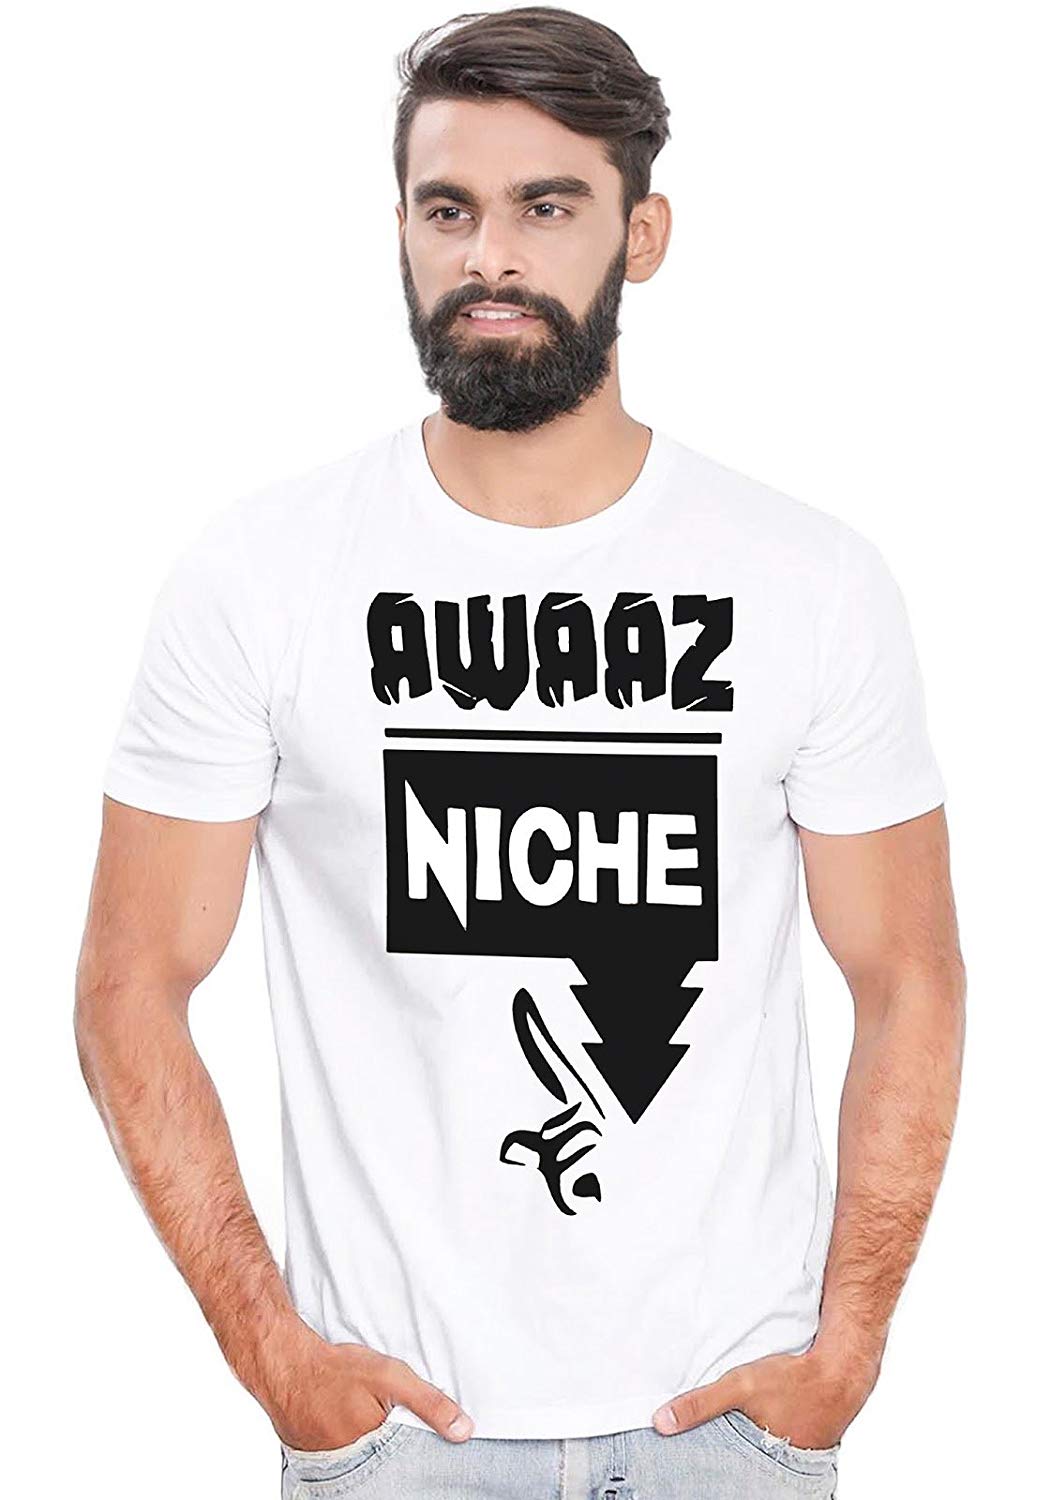 DOUBLE F ROUND NECK HALF SLEEVE WHITE COLOR AWAZ NICHE PRINTED T-SHIRT FOR MEN